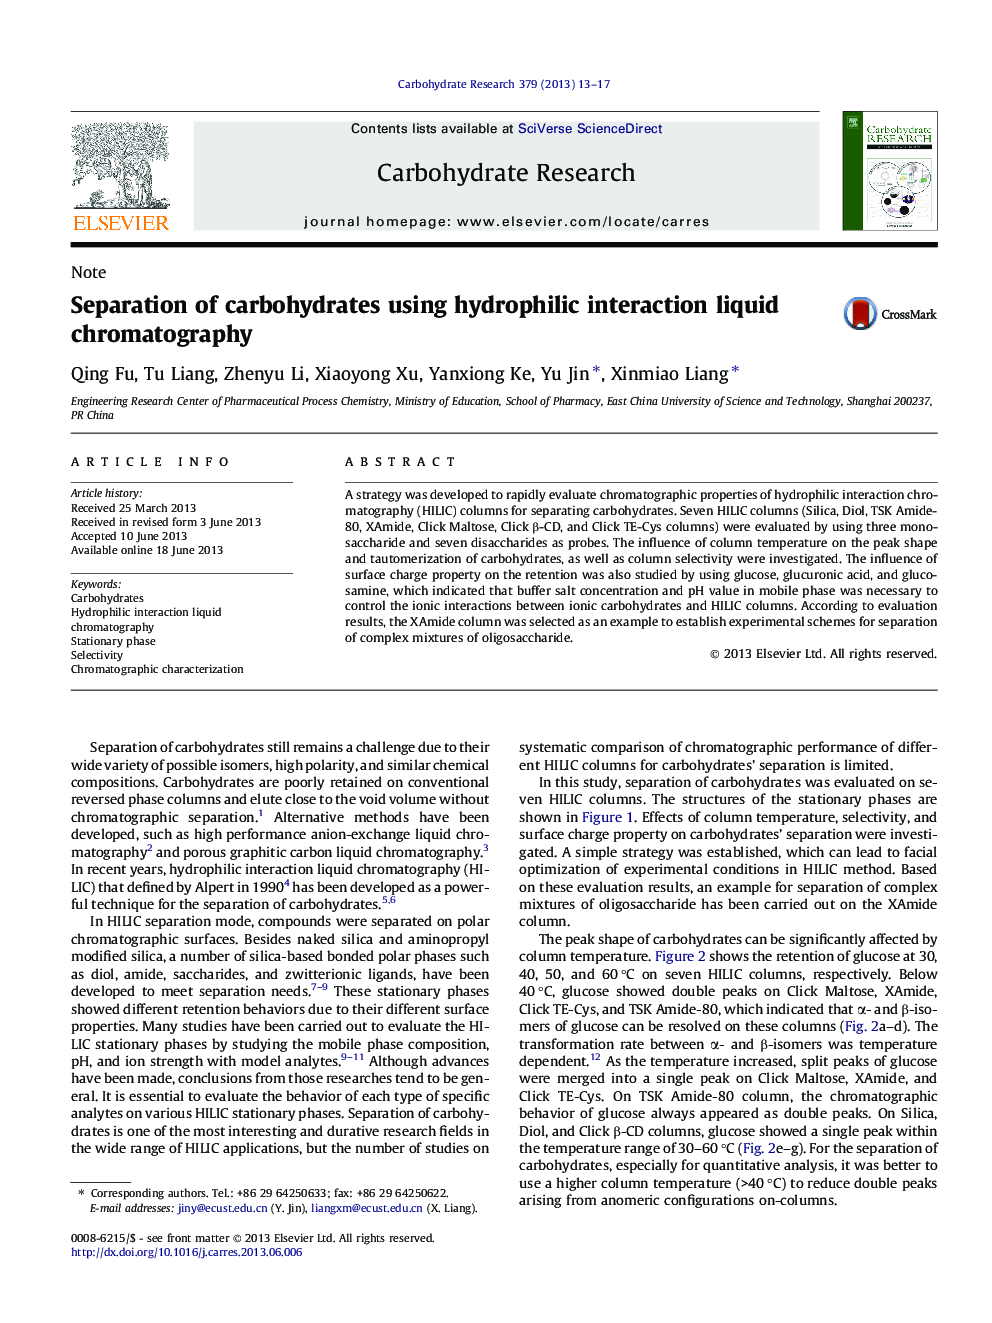 Separation of carbohydrates using hydrophilic interaction liquid chromatography